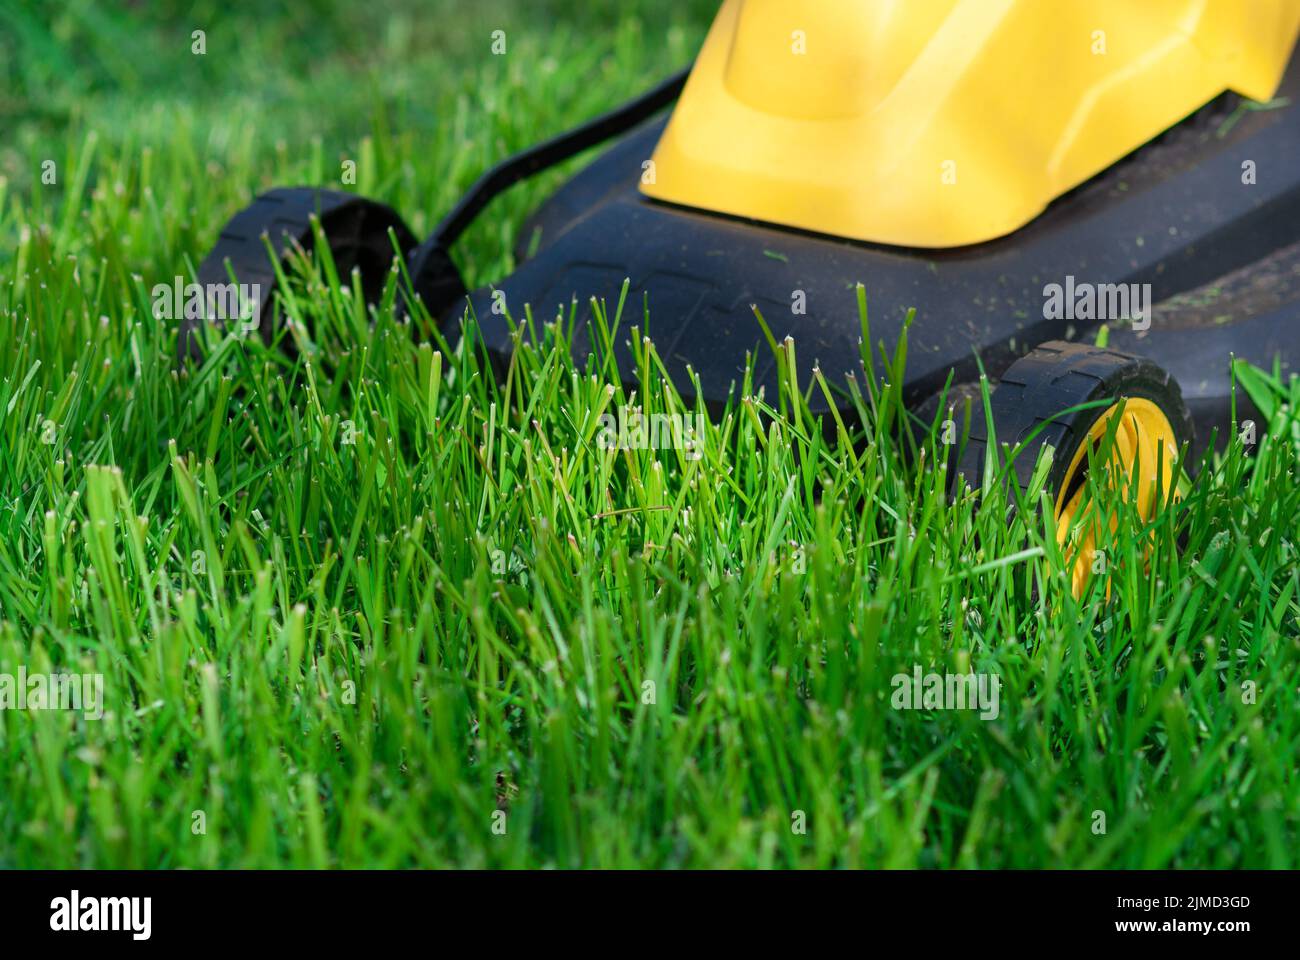 Lawn mower trimming grass, close up Stock Photo